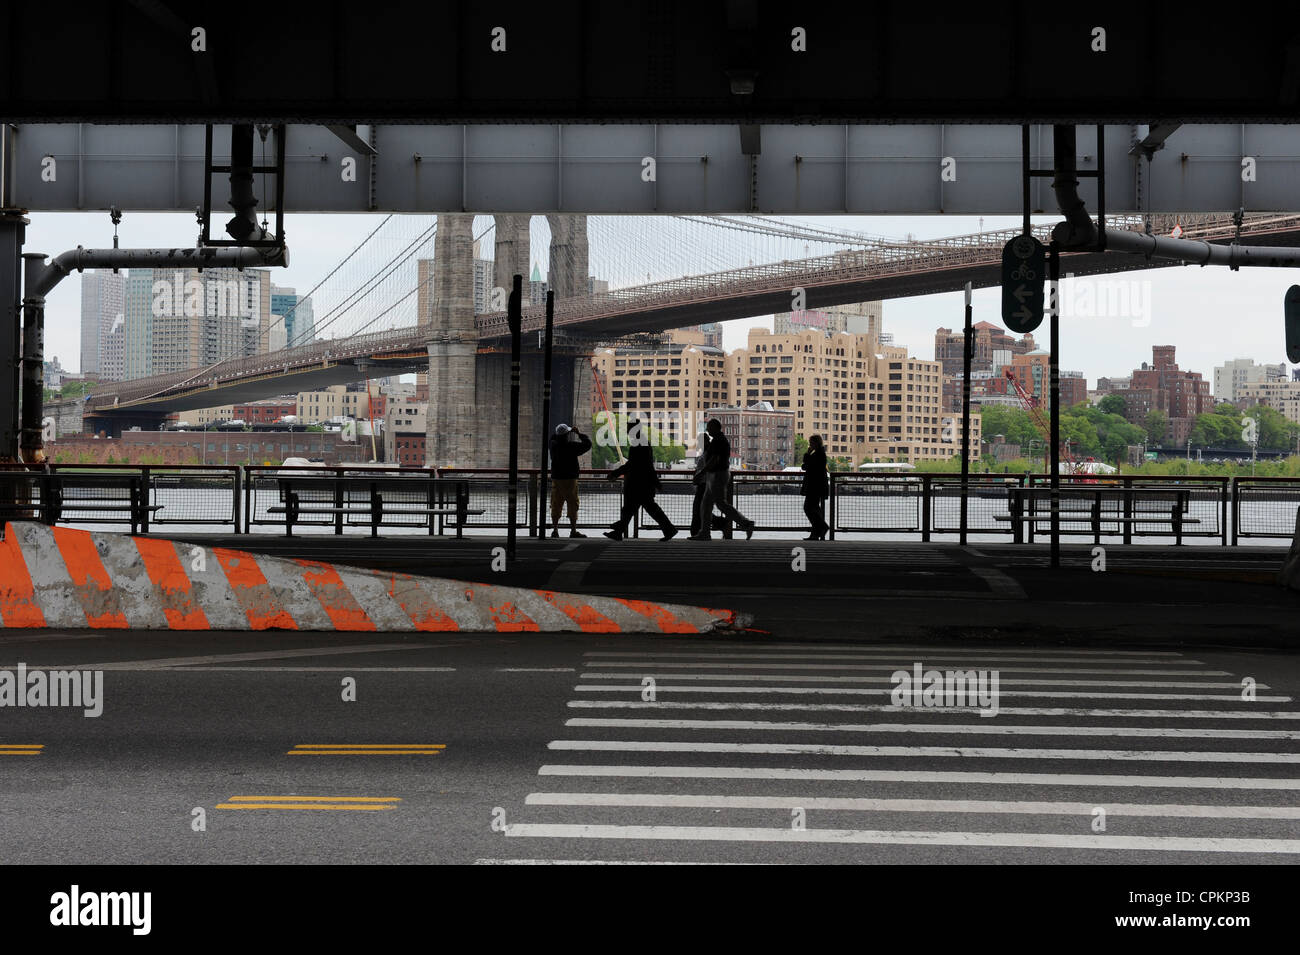 People walking under a bridge which shows Brooklyn Bridge in the distance, New York Stock Photo